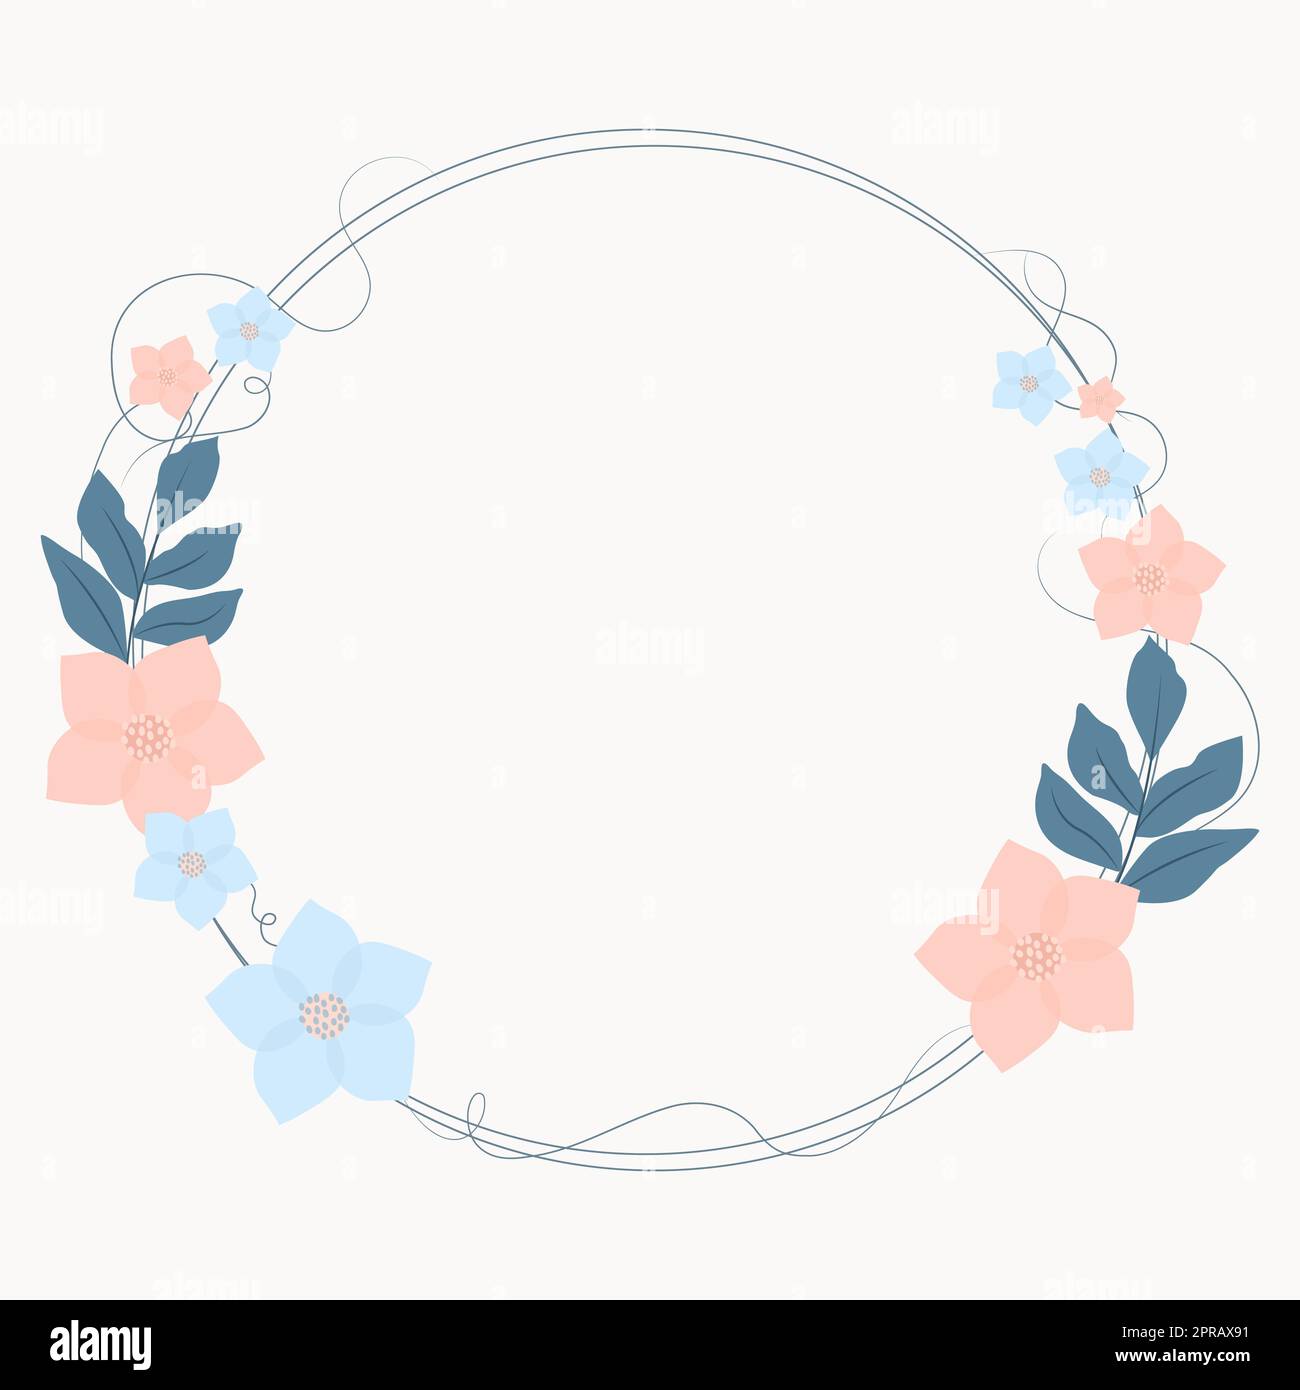 Blank Frame Decorated With Abstract Modernized Forms Flowers And Foliage. Empty Modern Border Surrounded By Multicolored Line Symbols Organized Pleasantly. Stock Photo